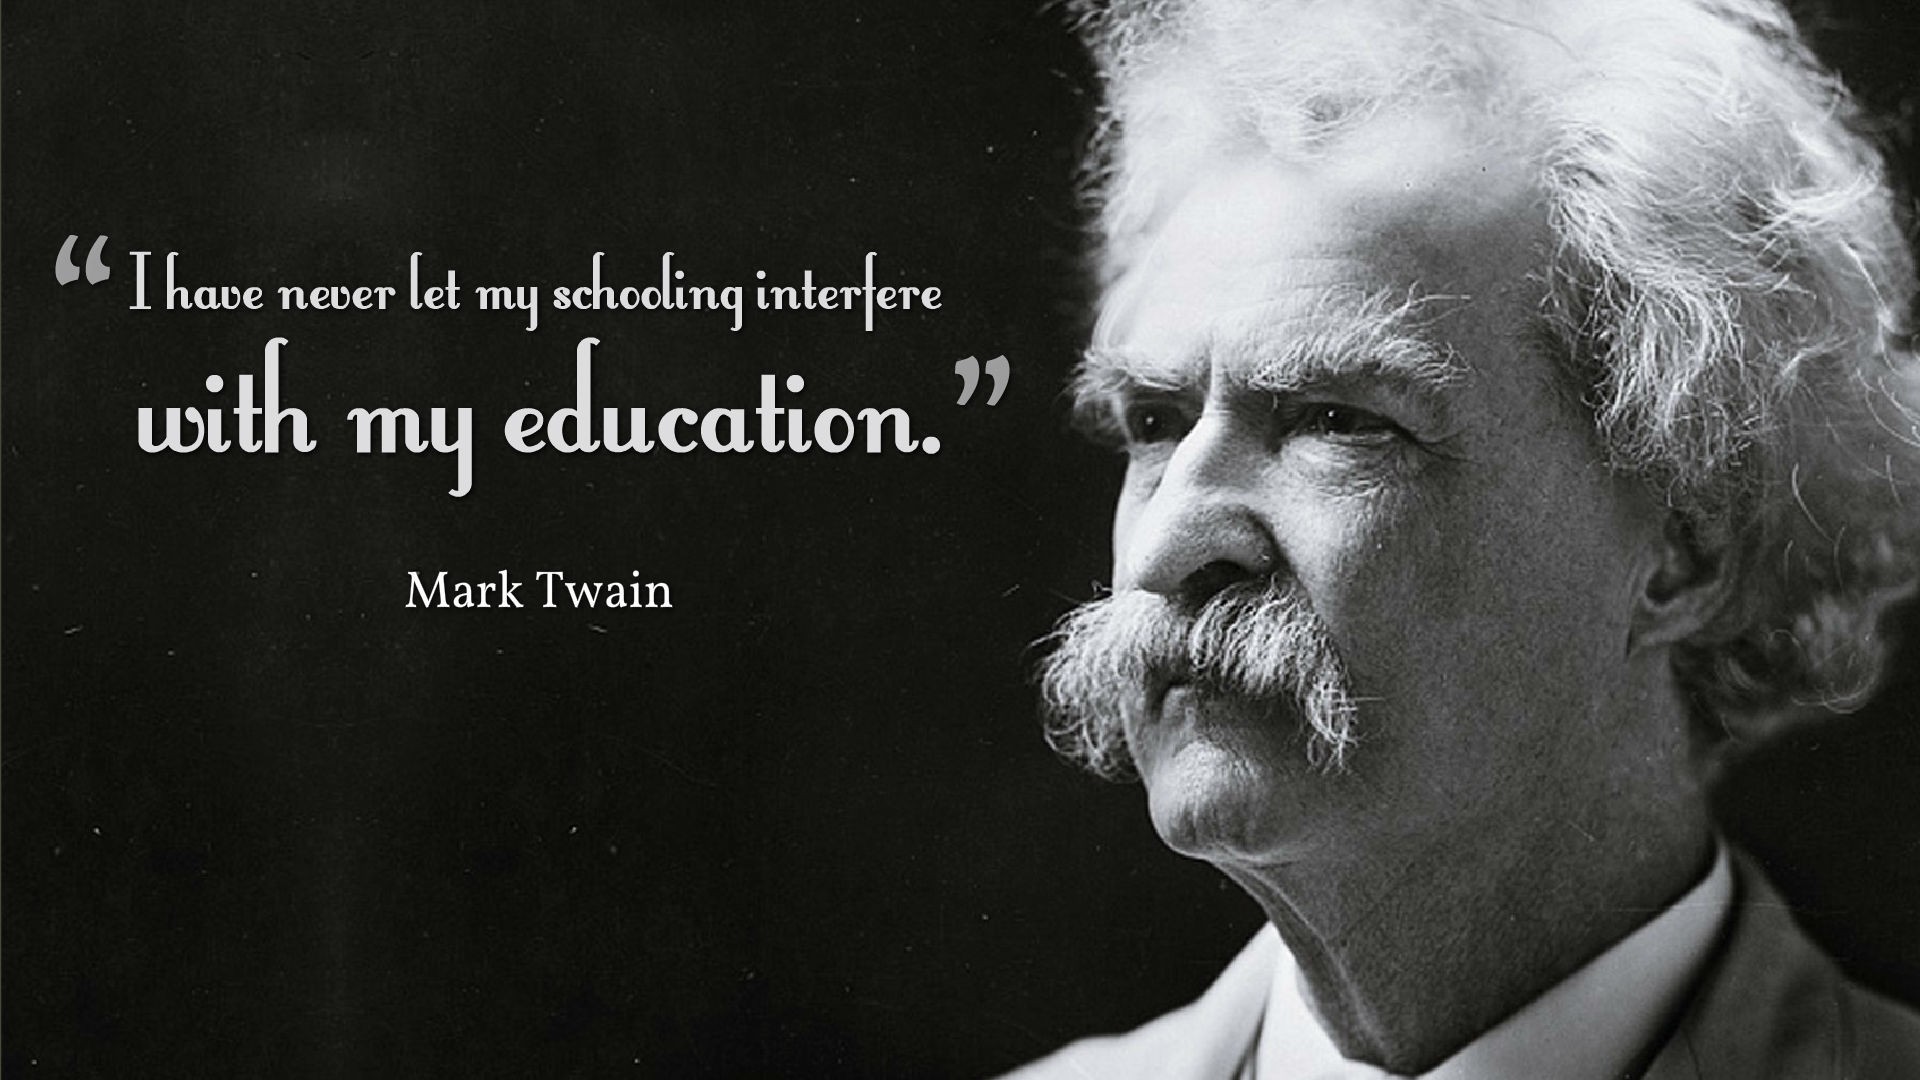 Free download Mark Twain Education Schooling Quotes Wallpaper 10768